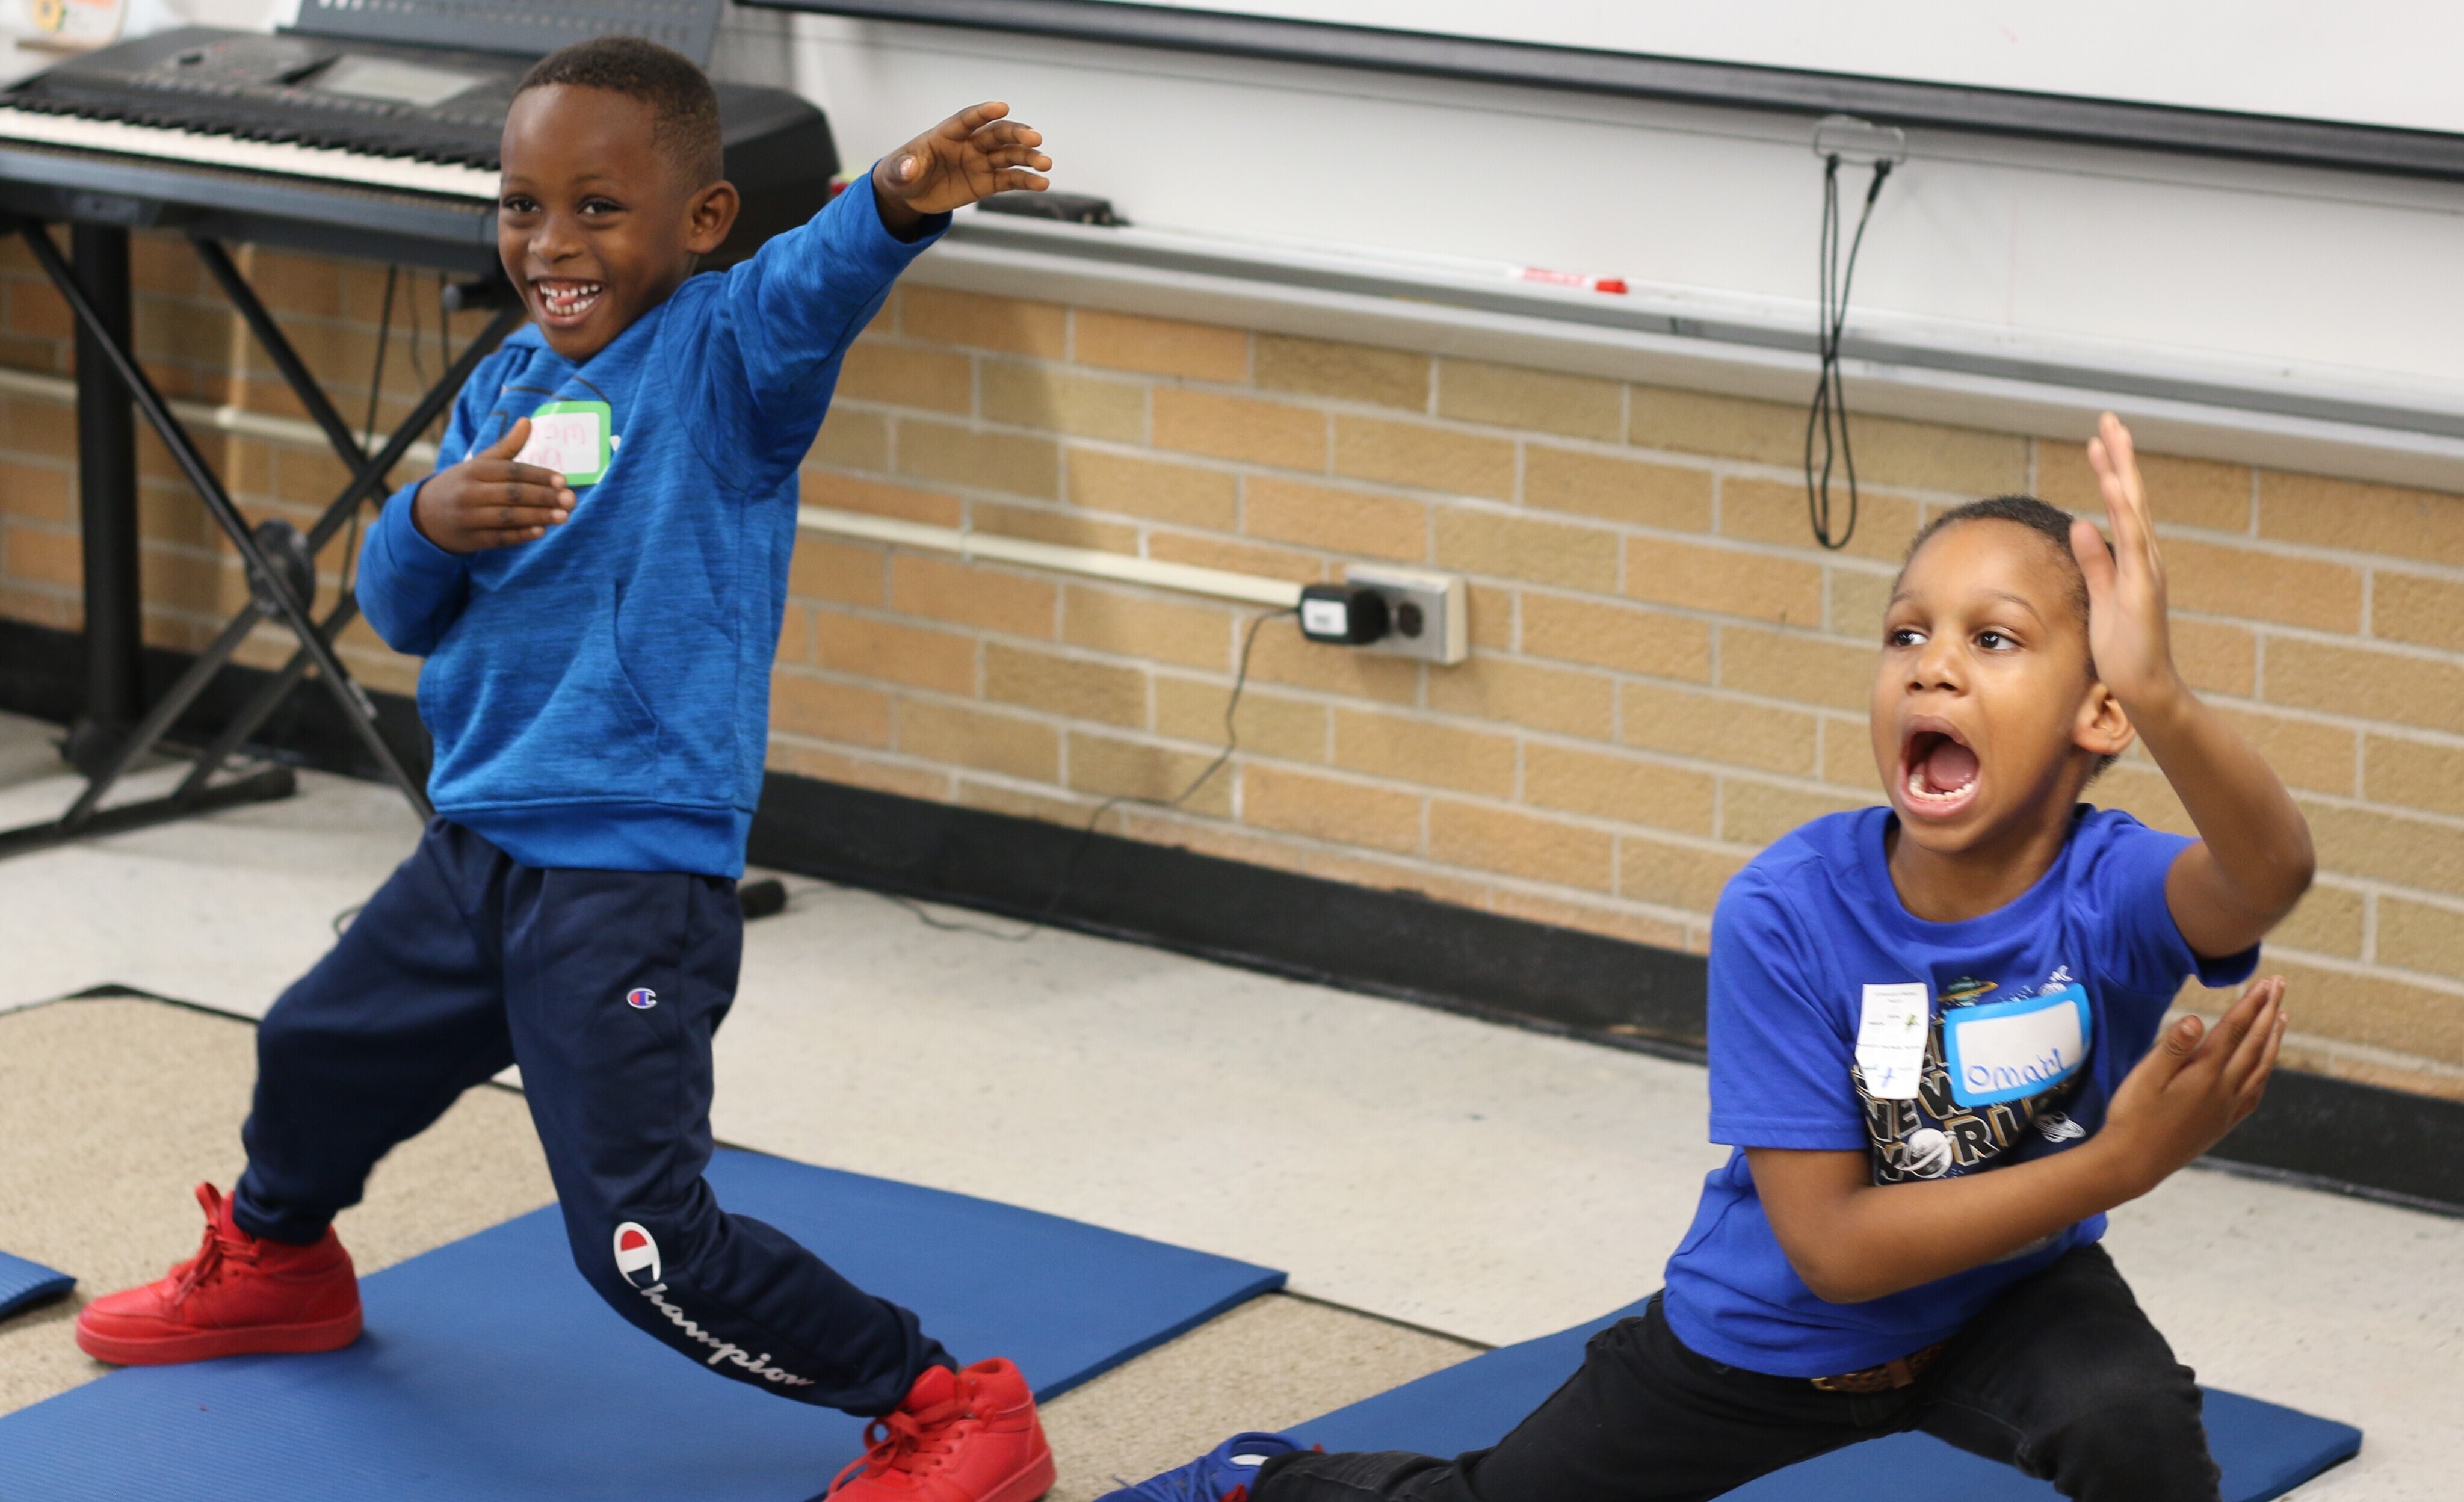 A yoga station as part of the wellness education activities was a big hit with scholars at Mulick Park Elementary